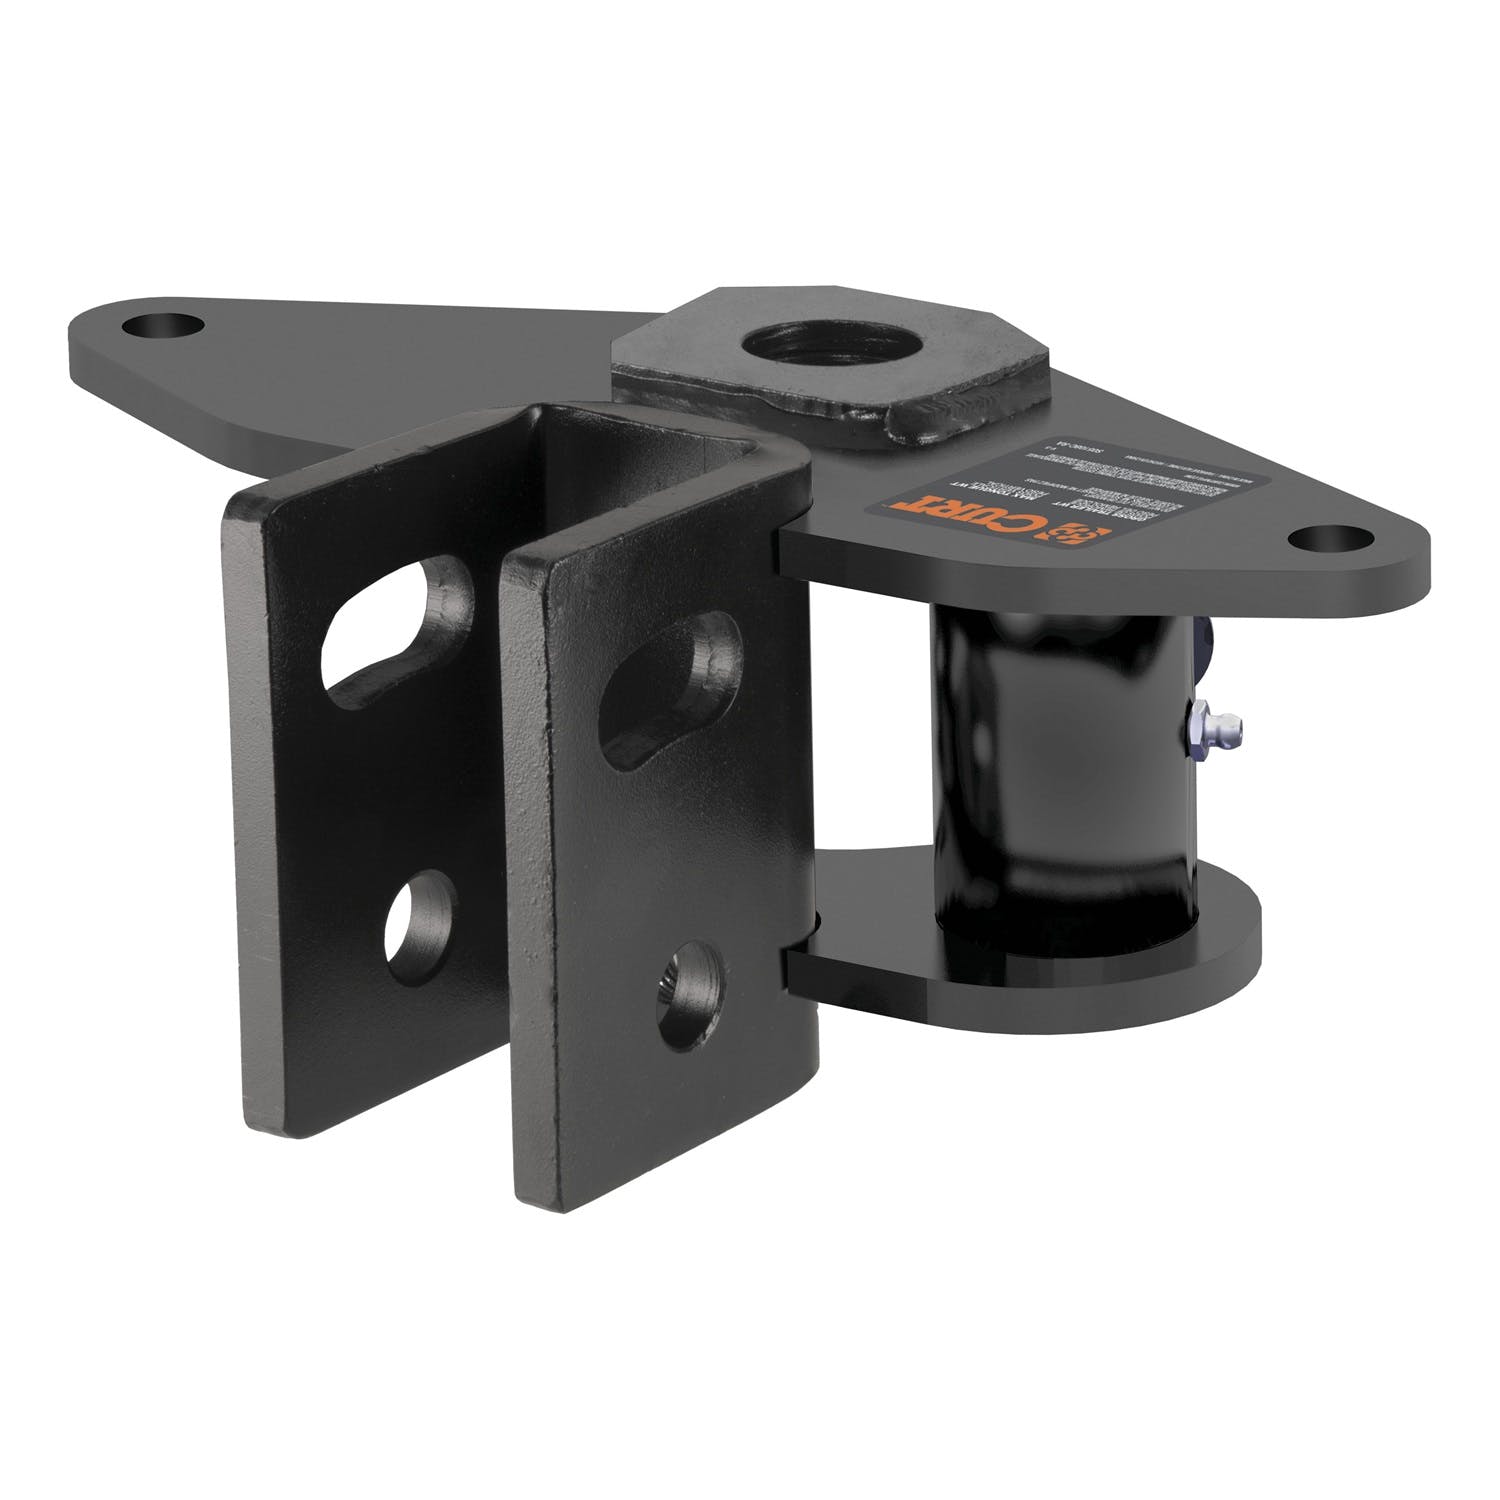 CURT 17057 Round Bar Weight Distribution Hitch with Integrated Lubrication (10-14K)